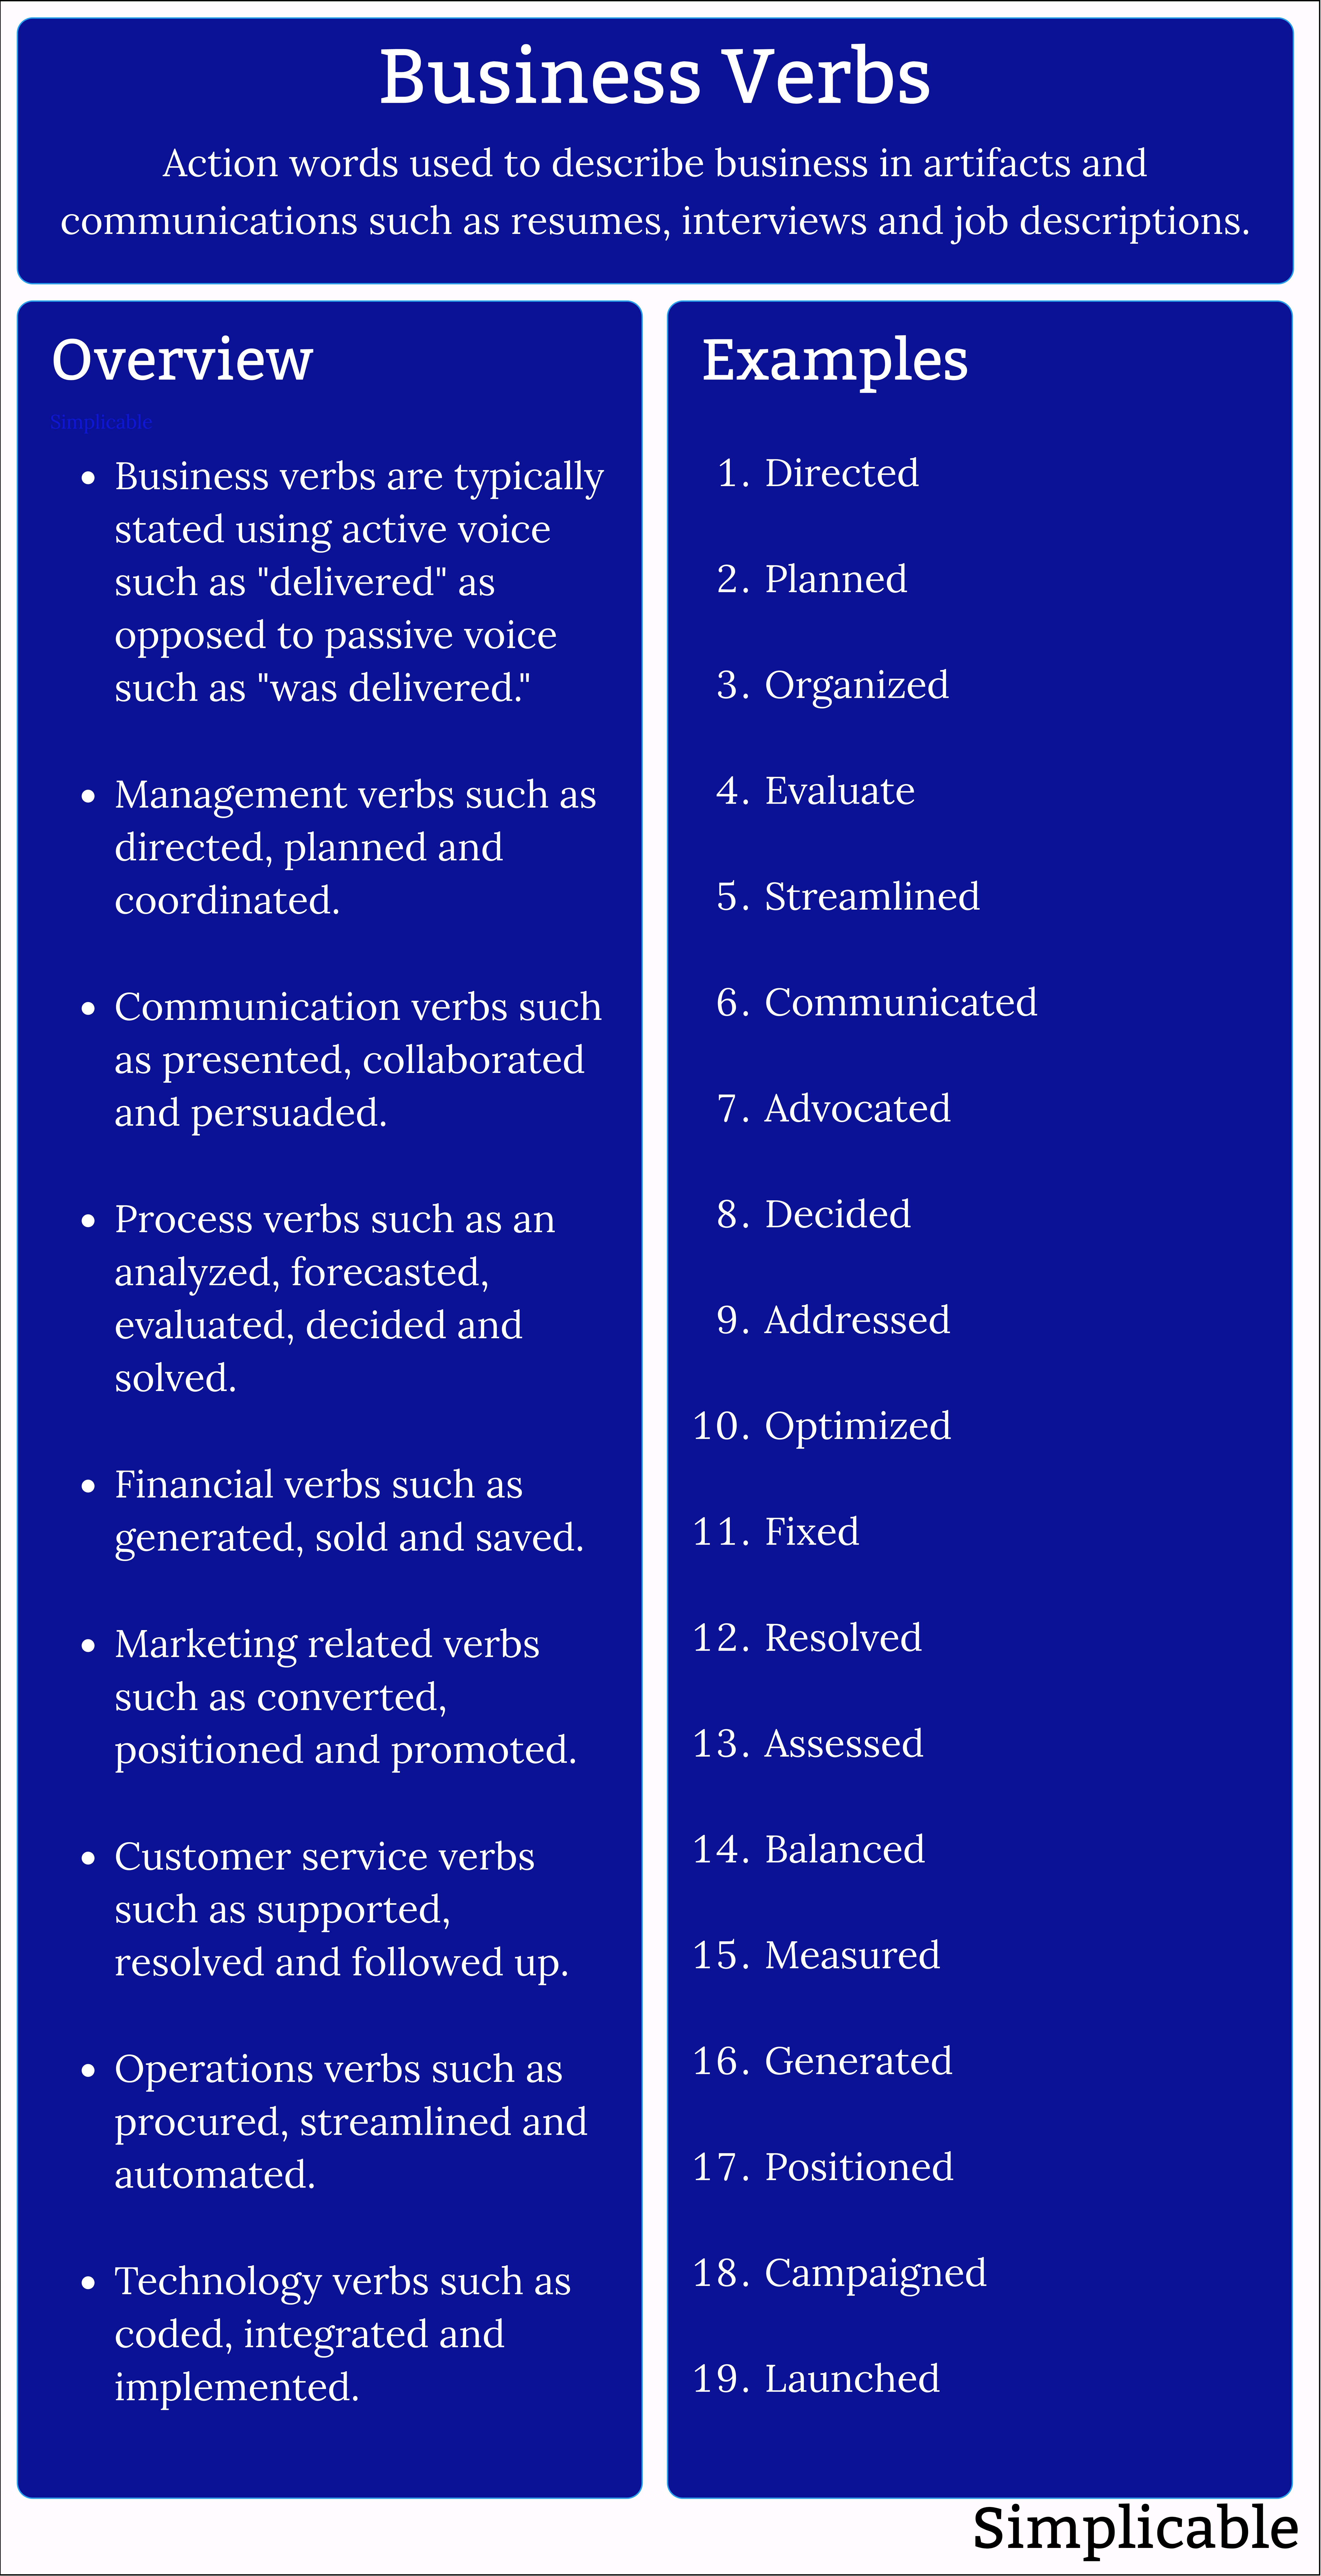 business verbs overview and examples